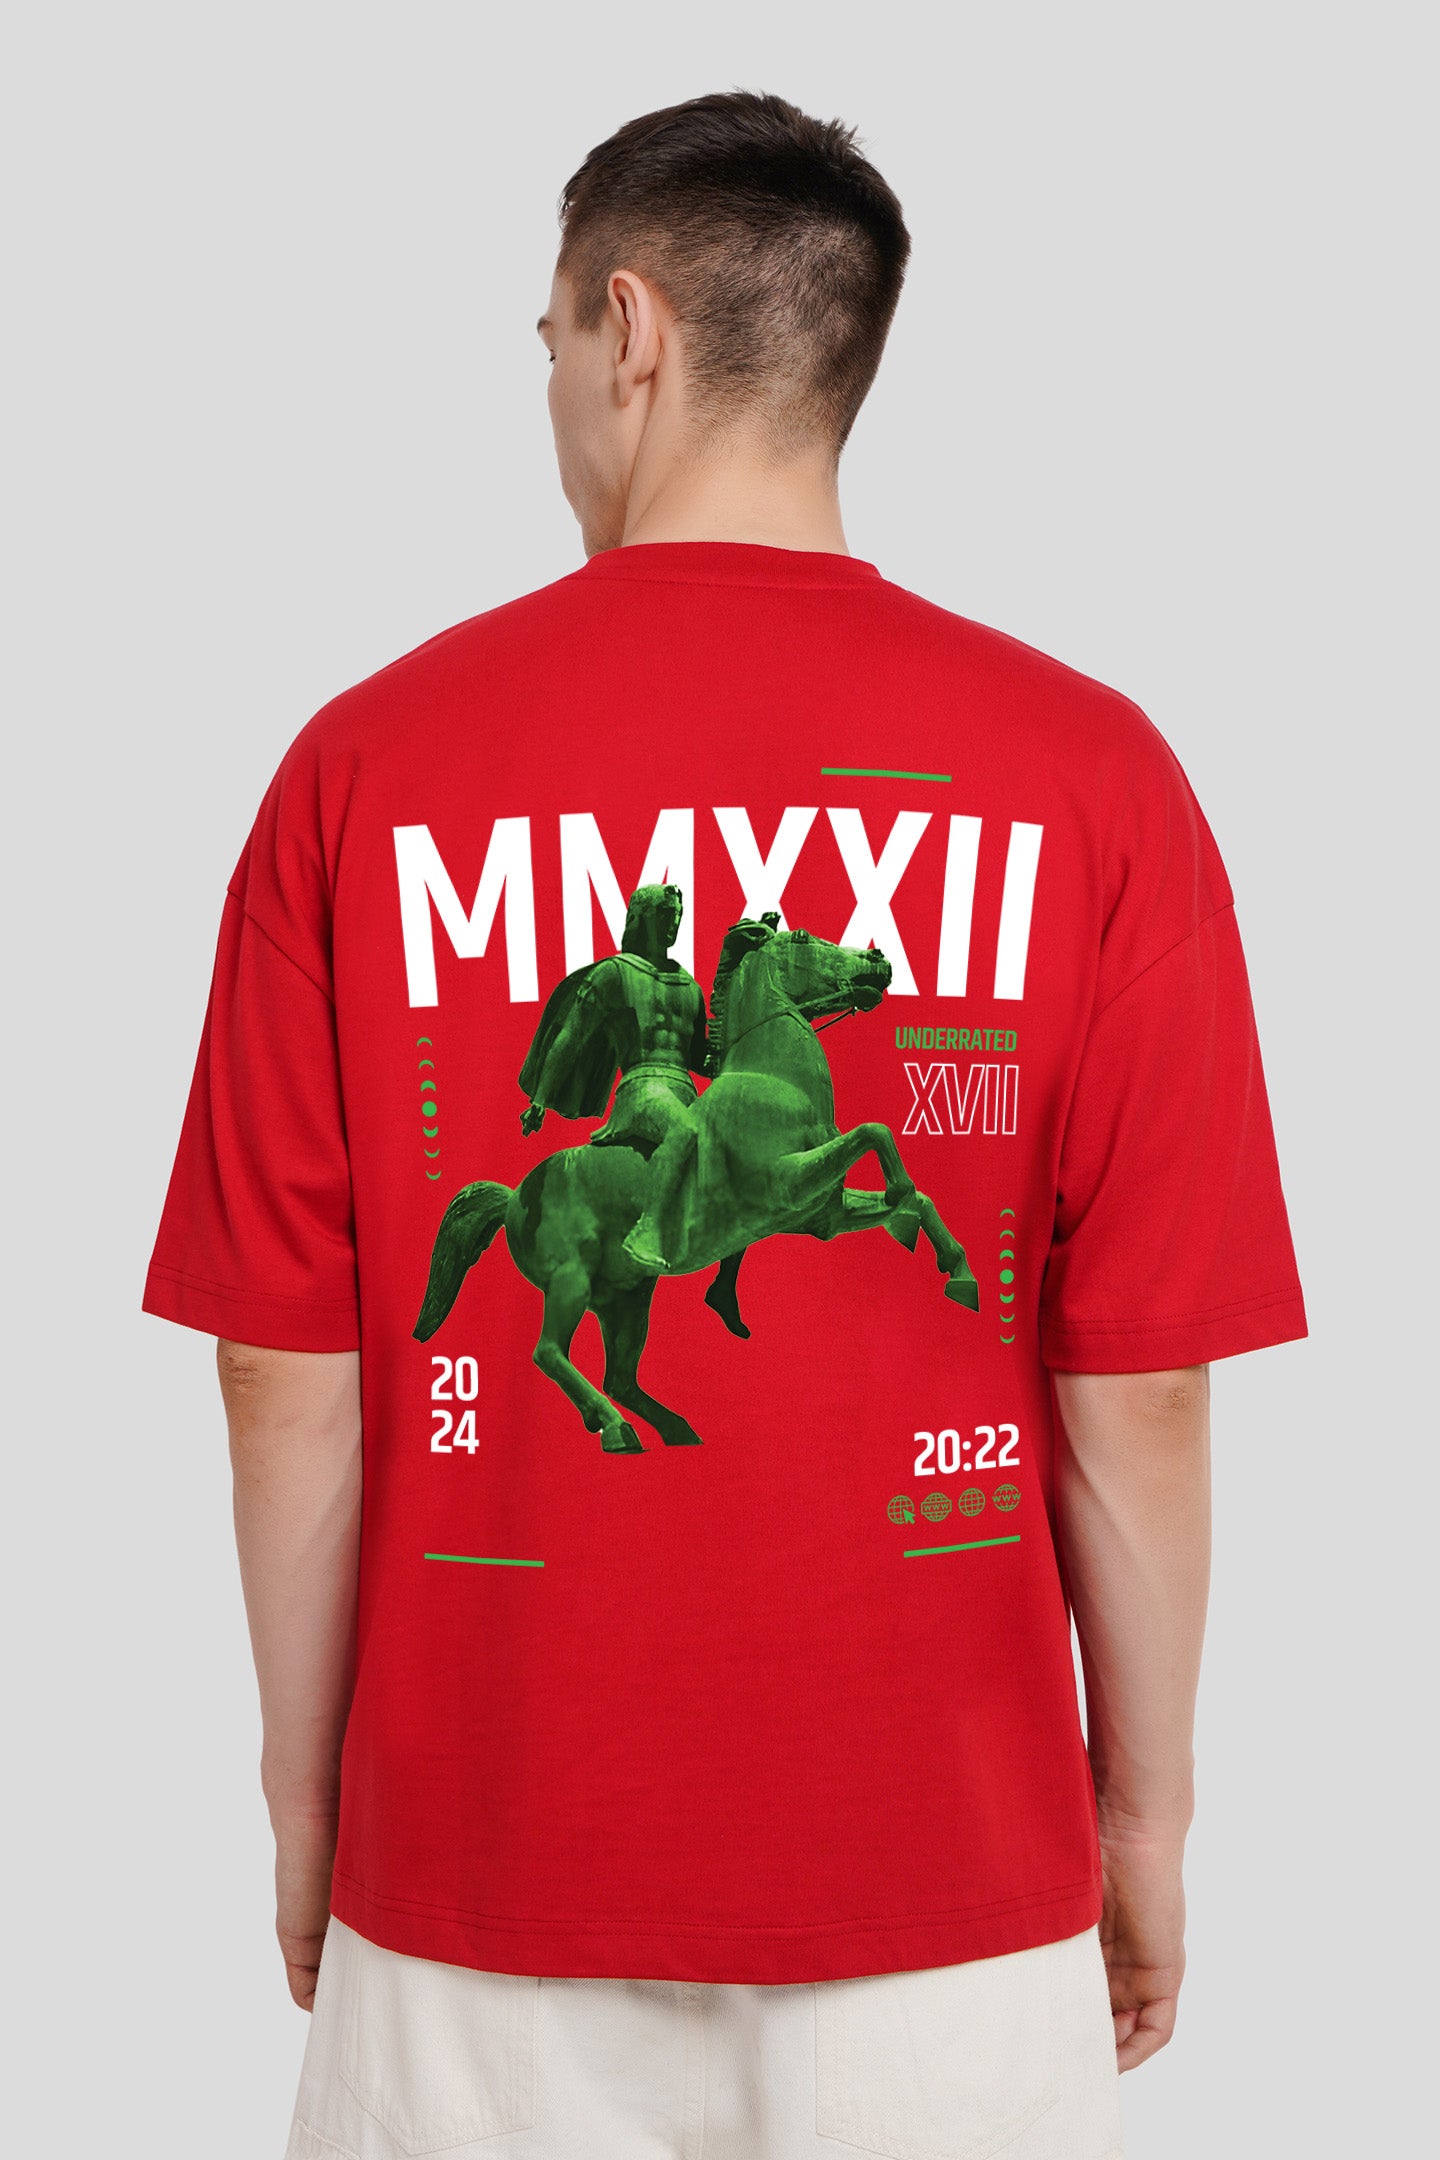 MMXXII Red Printed T-Shirt Men's Baggy Fit with Front and Back Design Pic 2